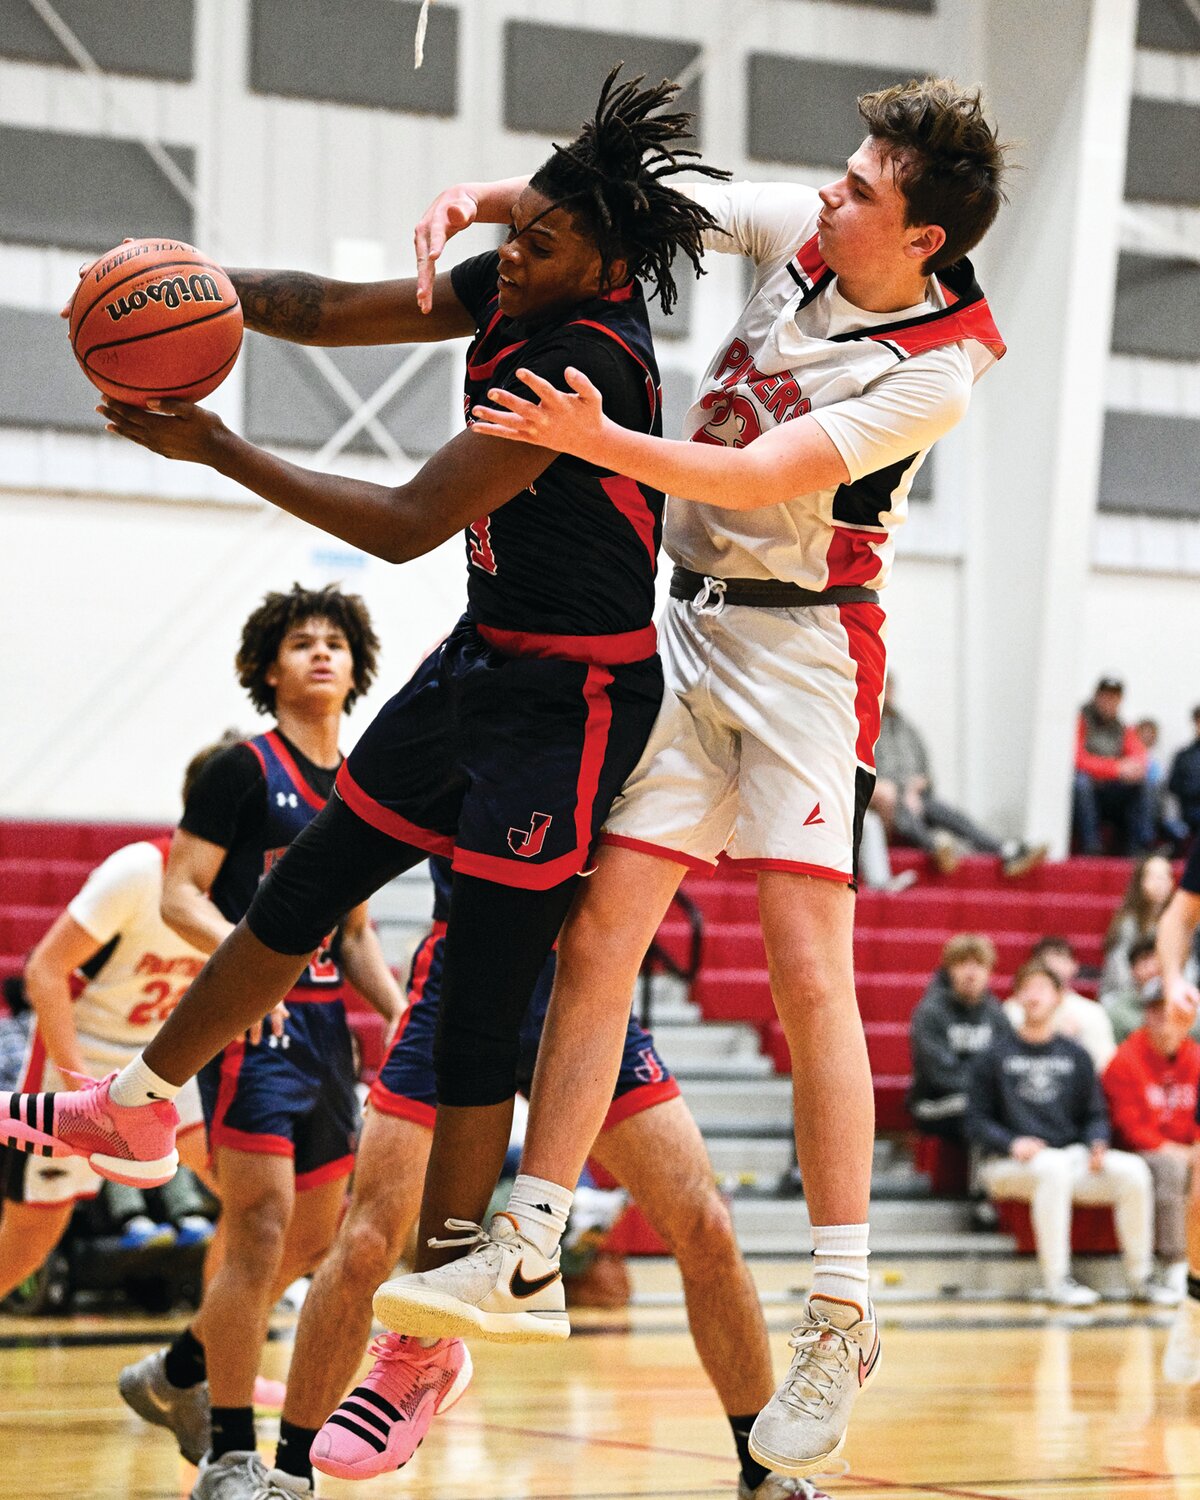 Jenkintown’s Desmond Trail gets the rebound in front of Plumstead Christian’s Drew Mandia.